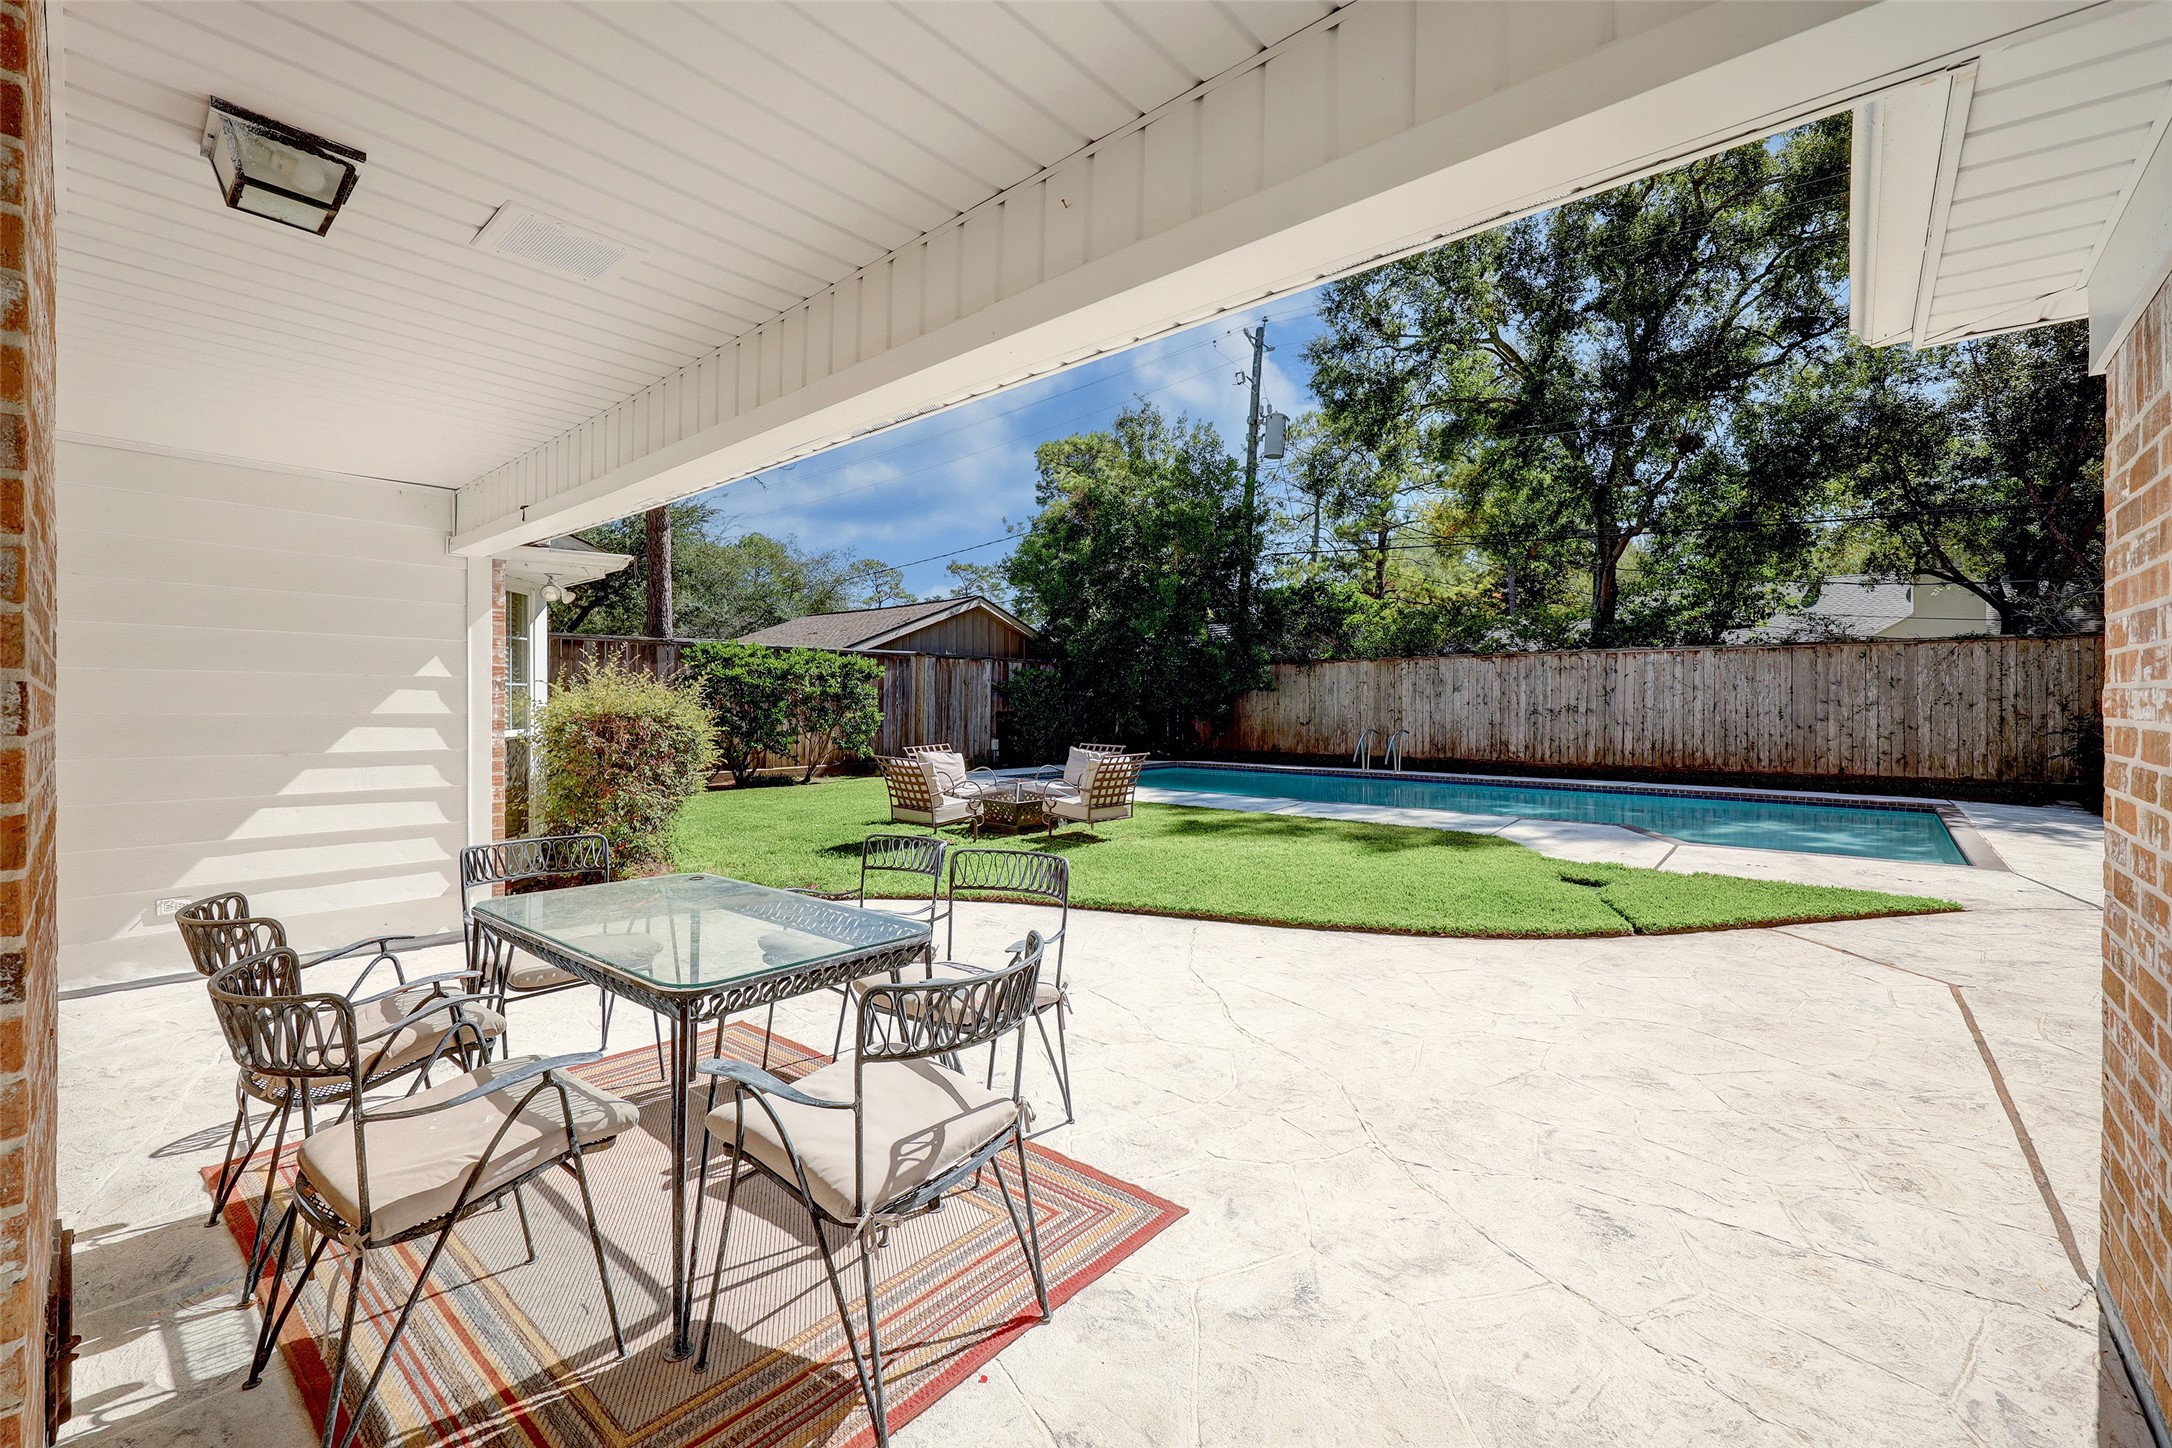 Incredible view of the backyard and pool. Covered sitting area is perfect for an outdoor dining space.